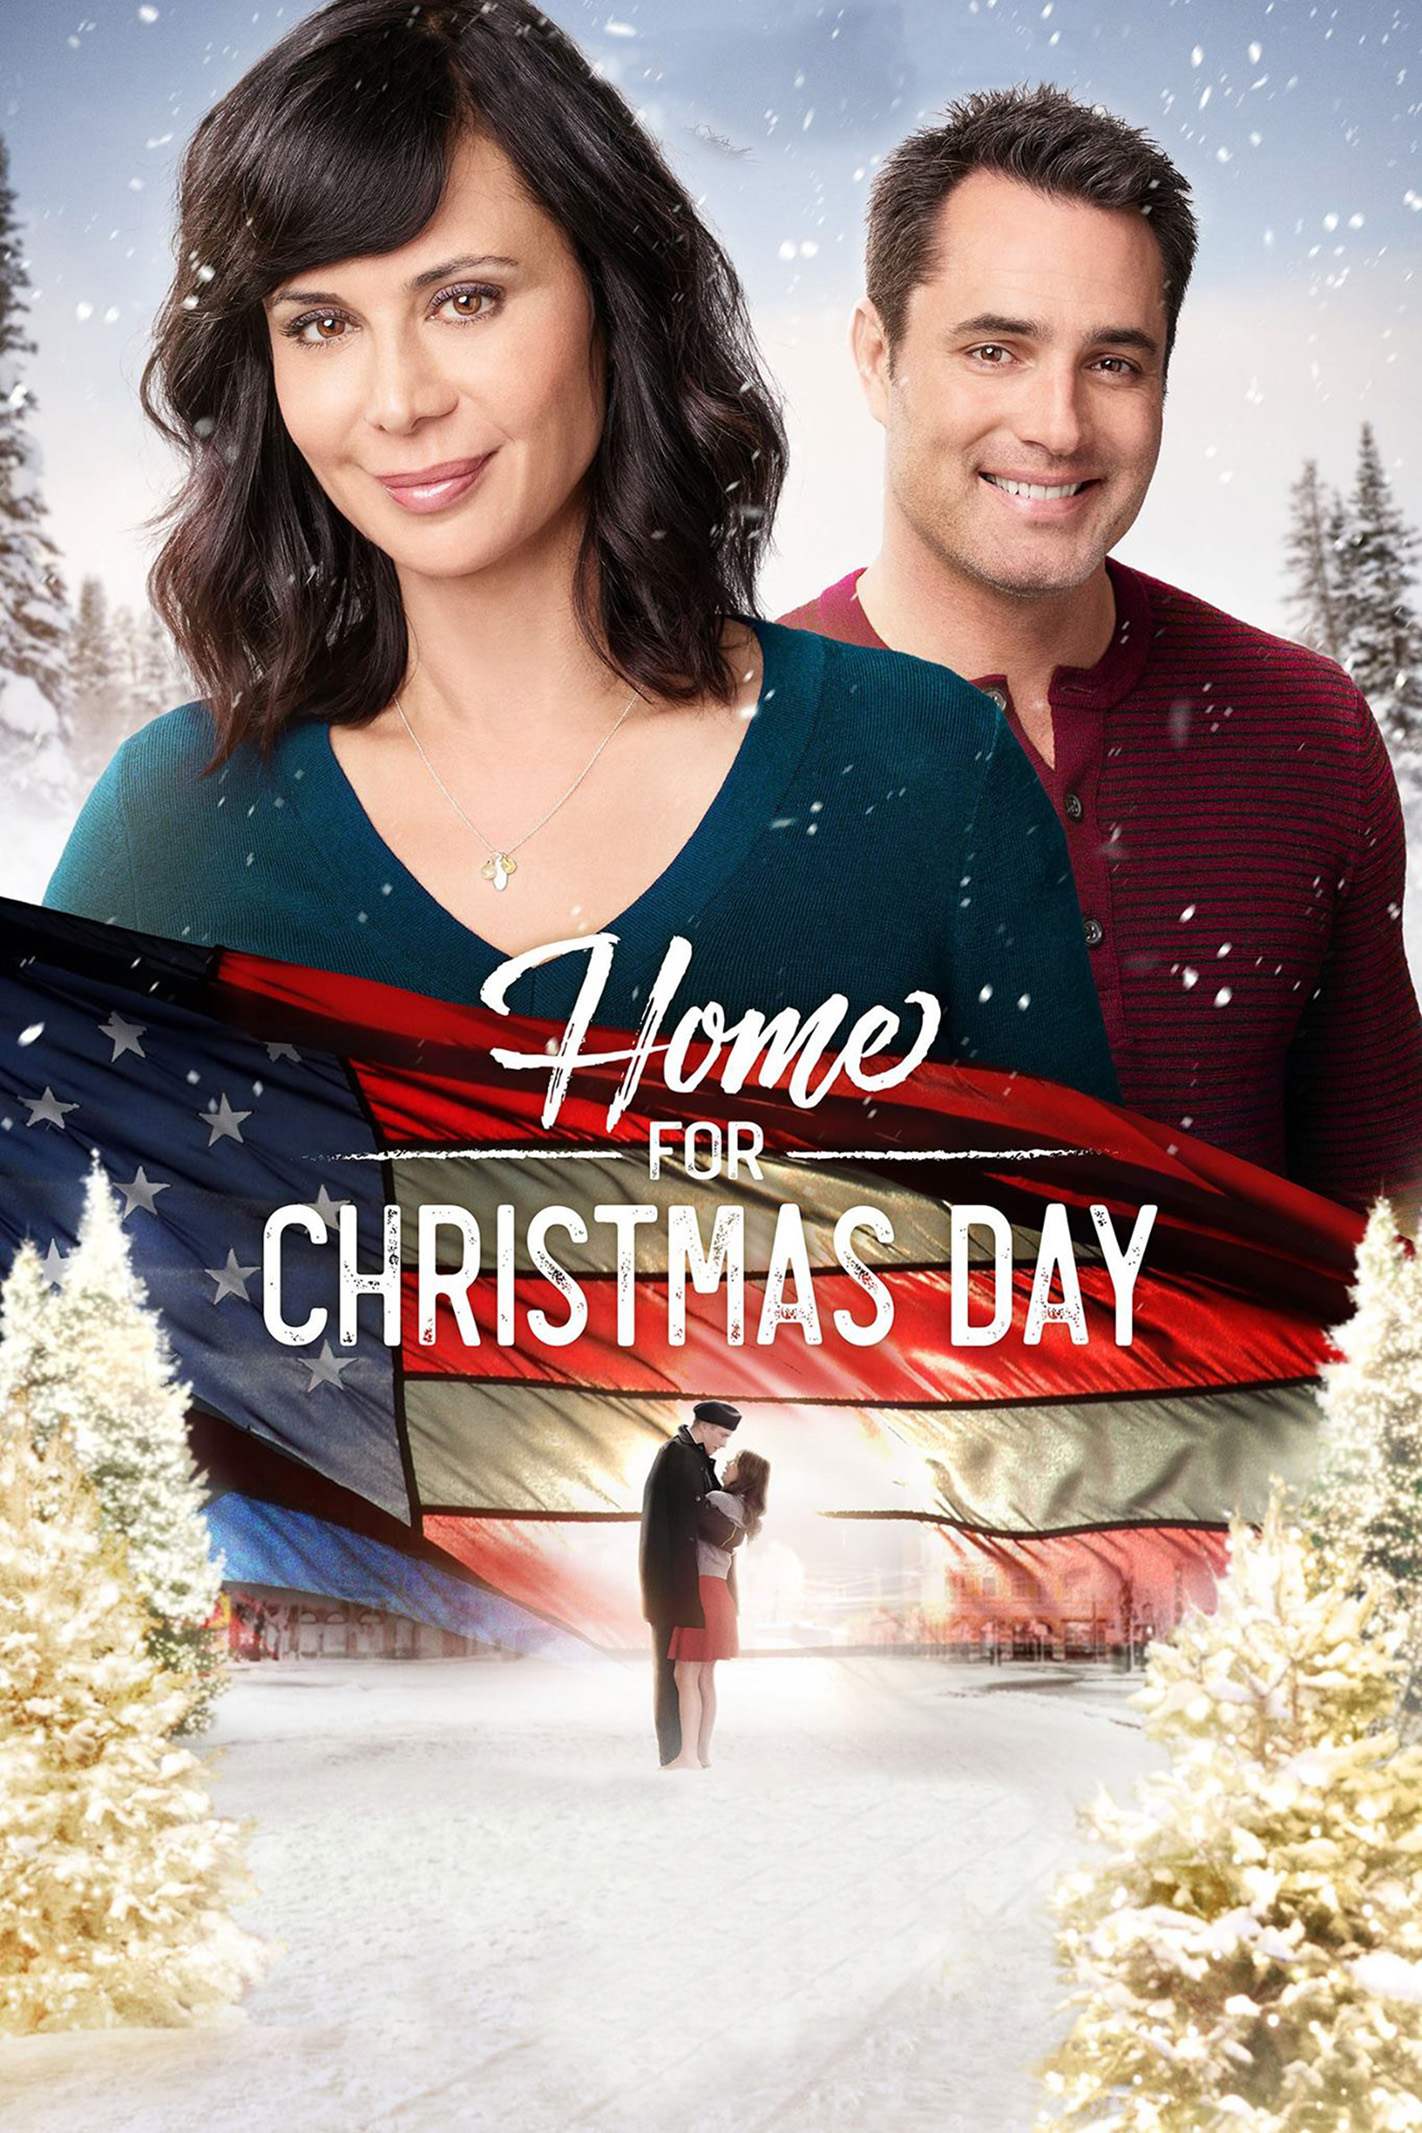 Home For Christmas Day Clean Poster small.jpg